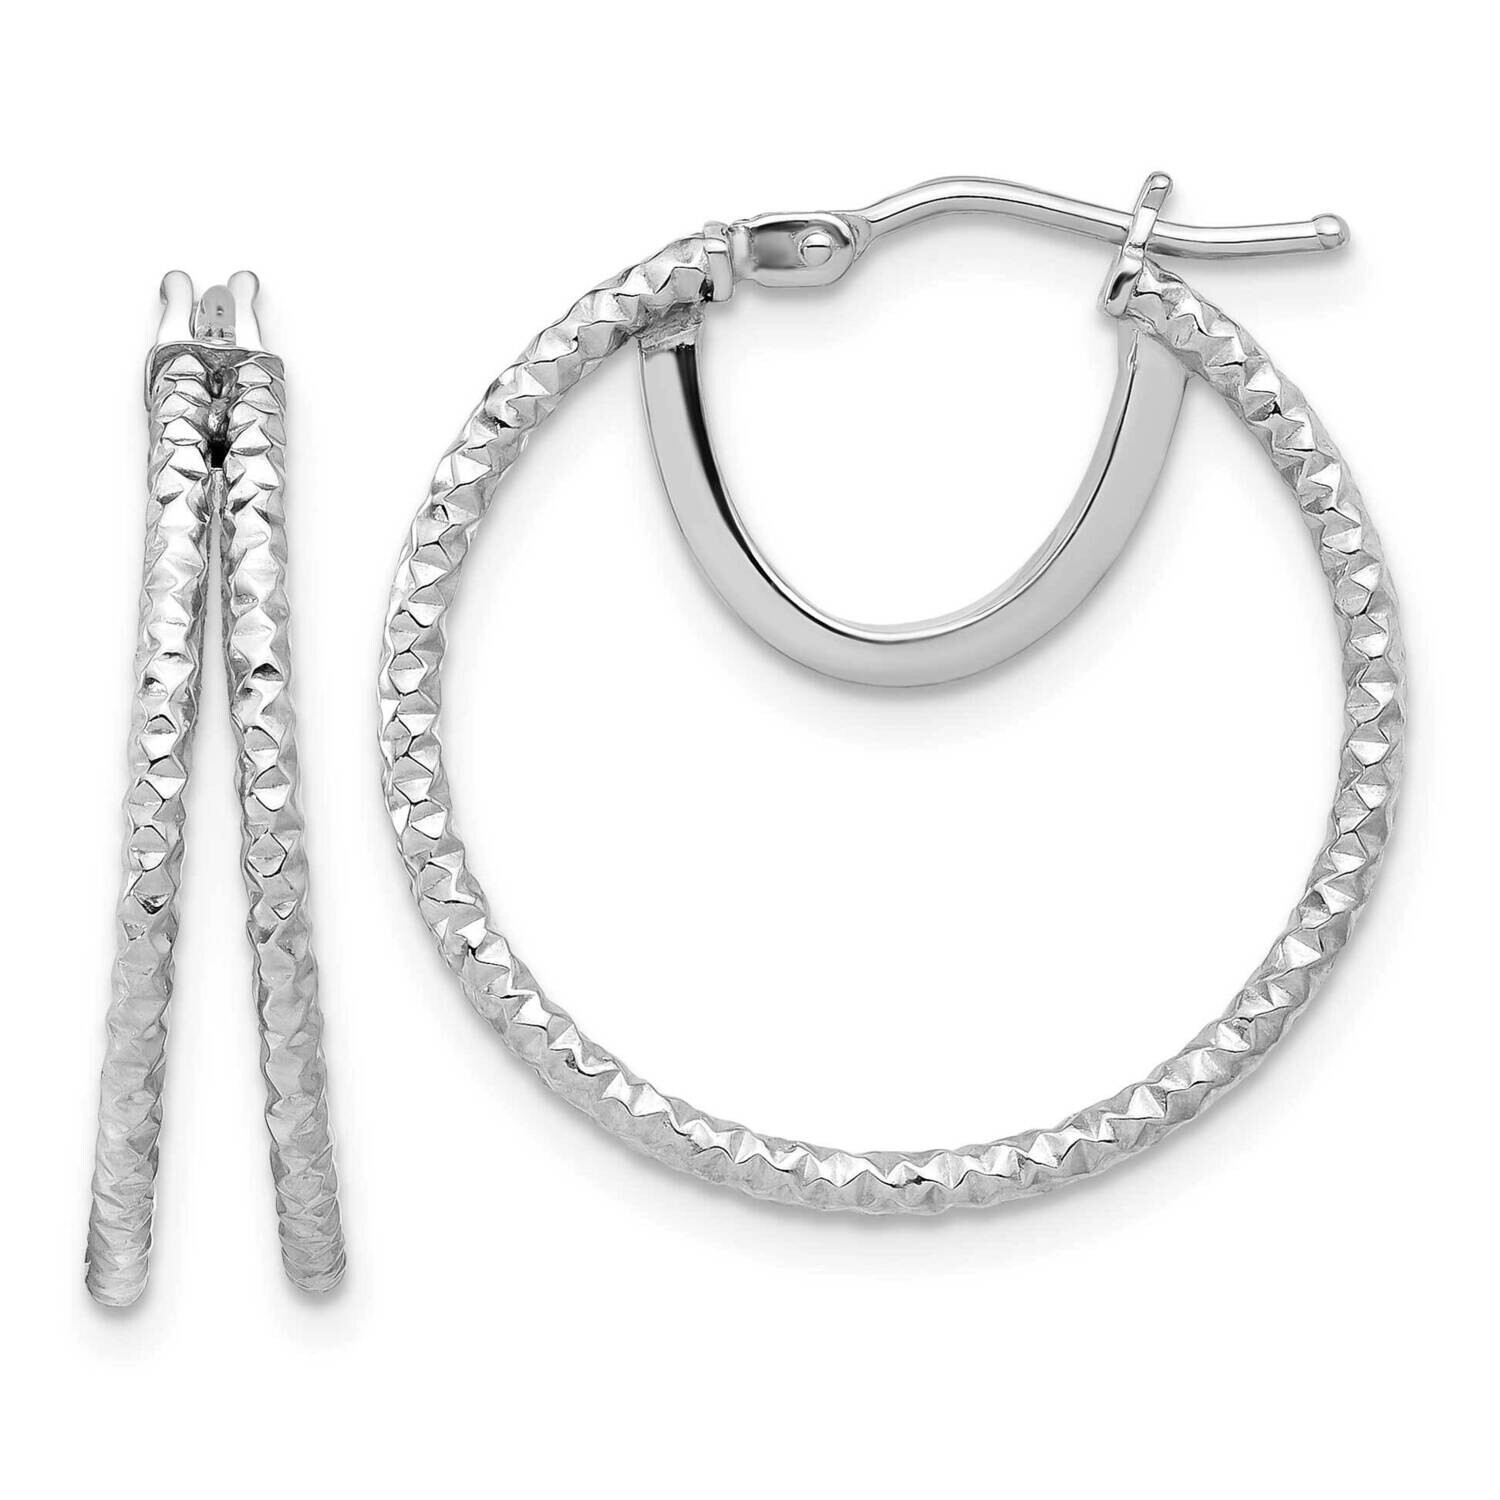 Polish Textured Double Circle Hoop Earrings 14k White Gold TF2268W